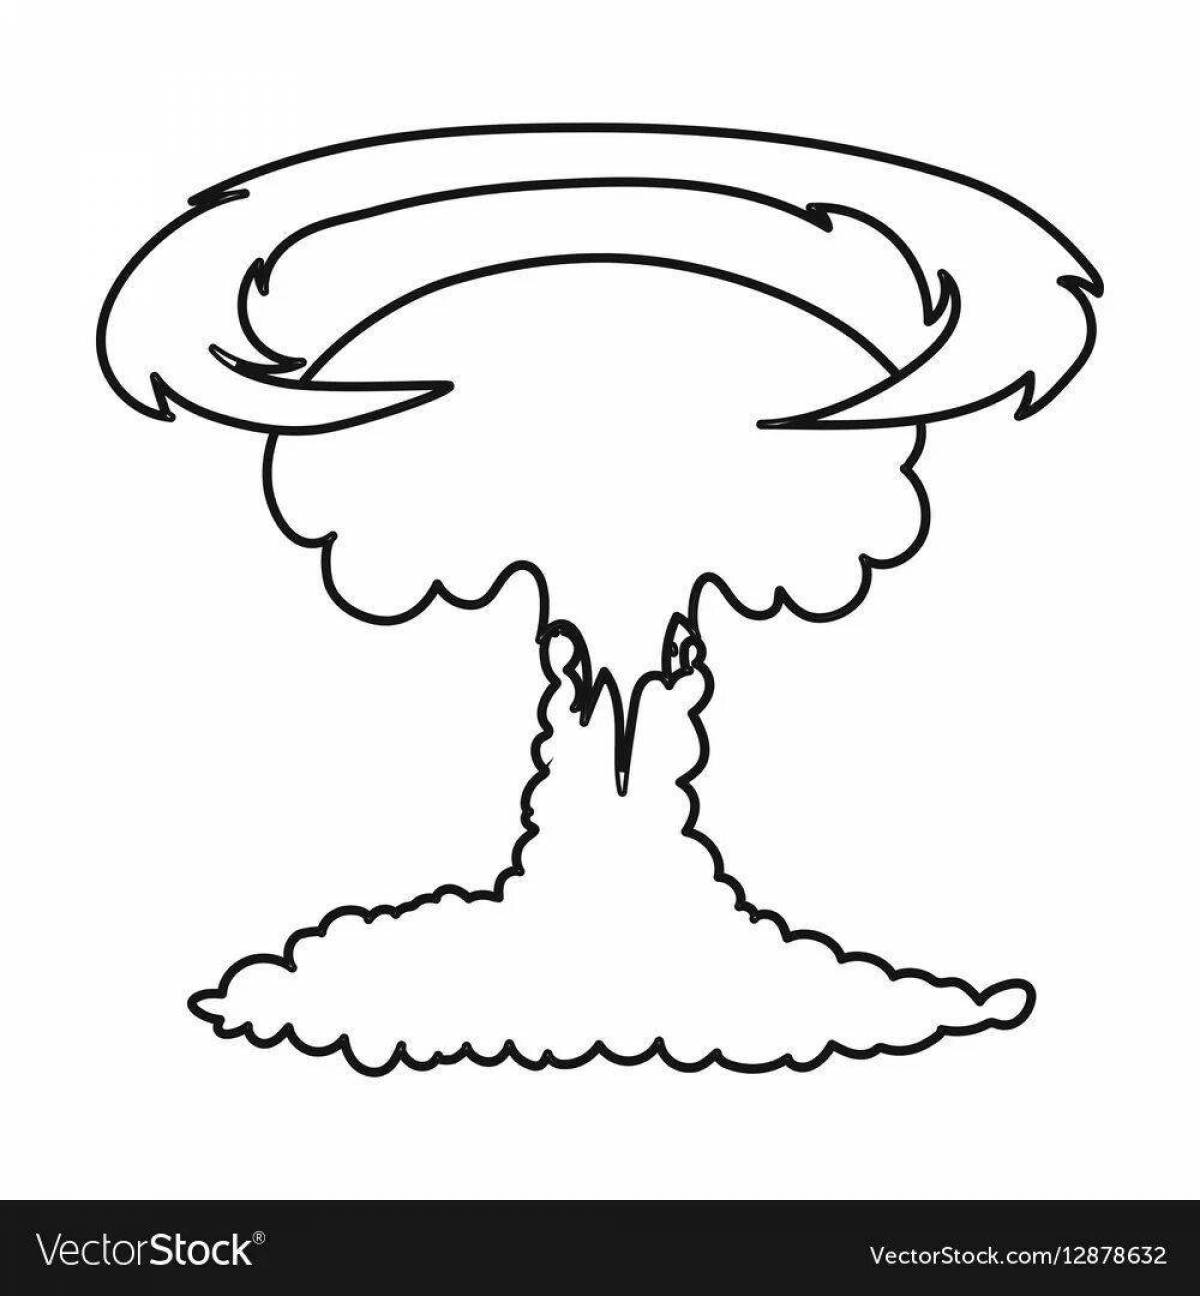 Nuclear explosion shiny coloring book